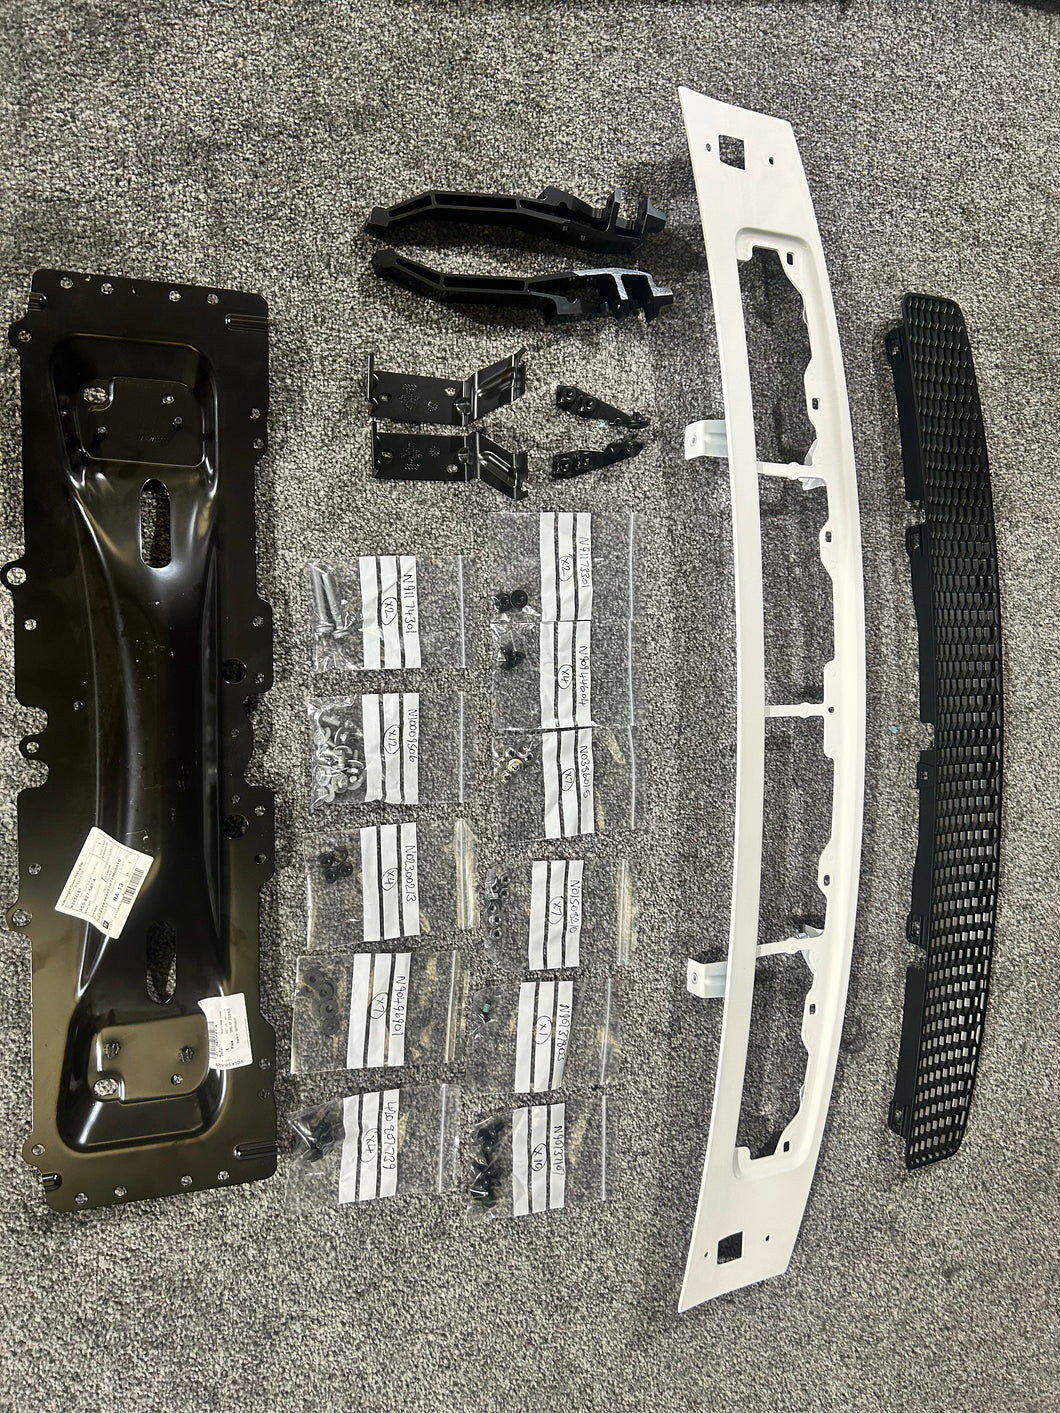 Mounting Kit for AUDI R8 (None V10 Plus) (4S Gen 2) Carbon Fibre Rear Wing Spoiler (Performance Pack Swan Neck Style)